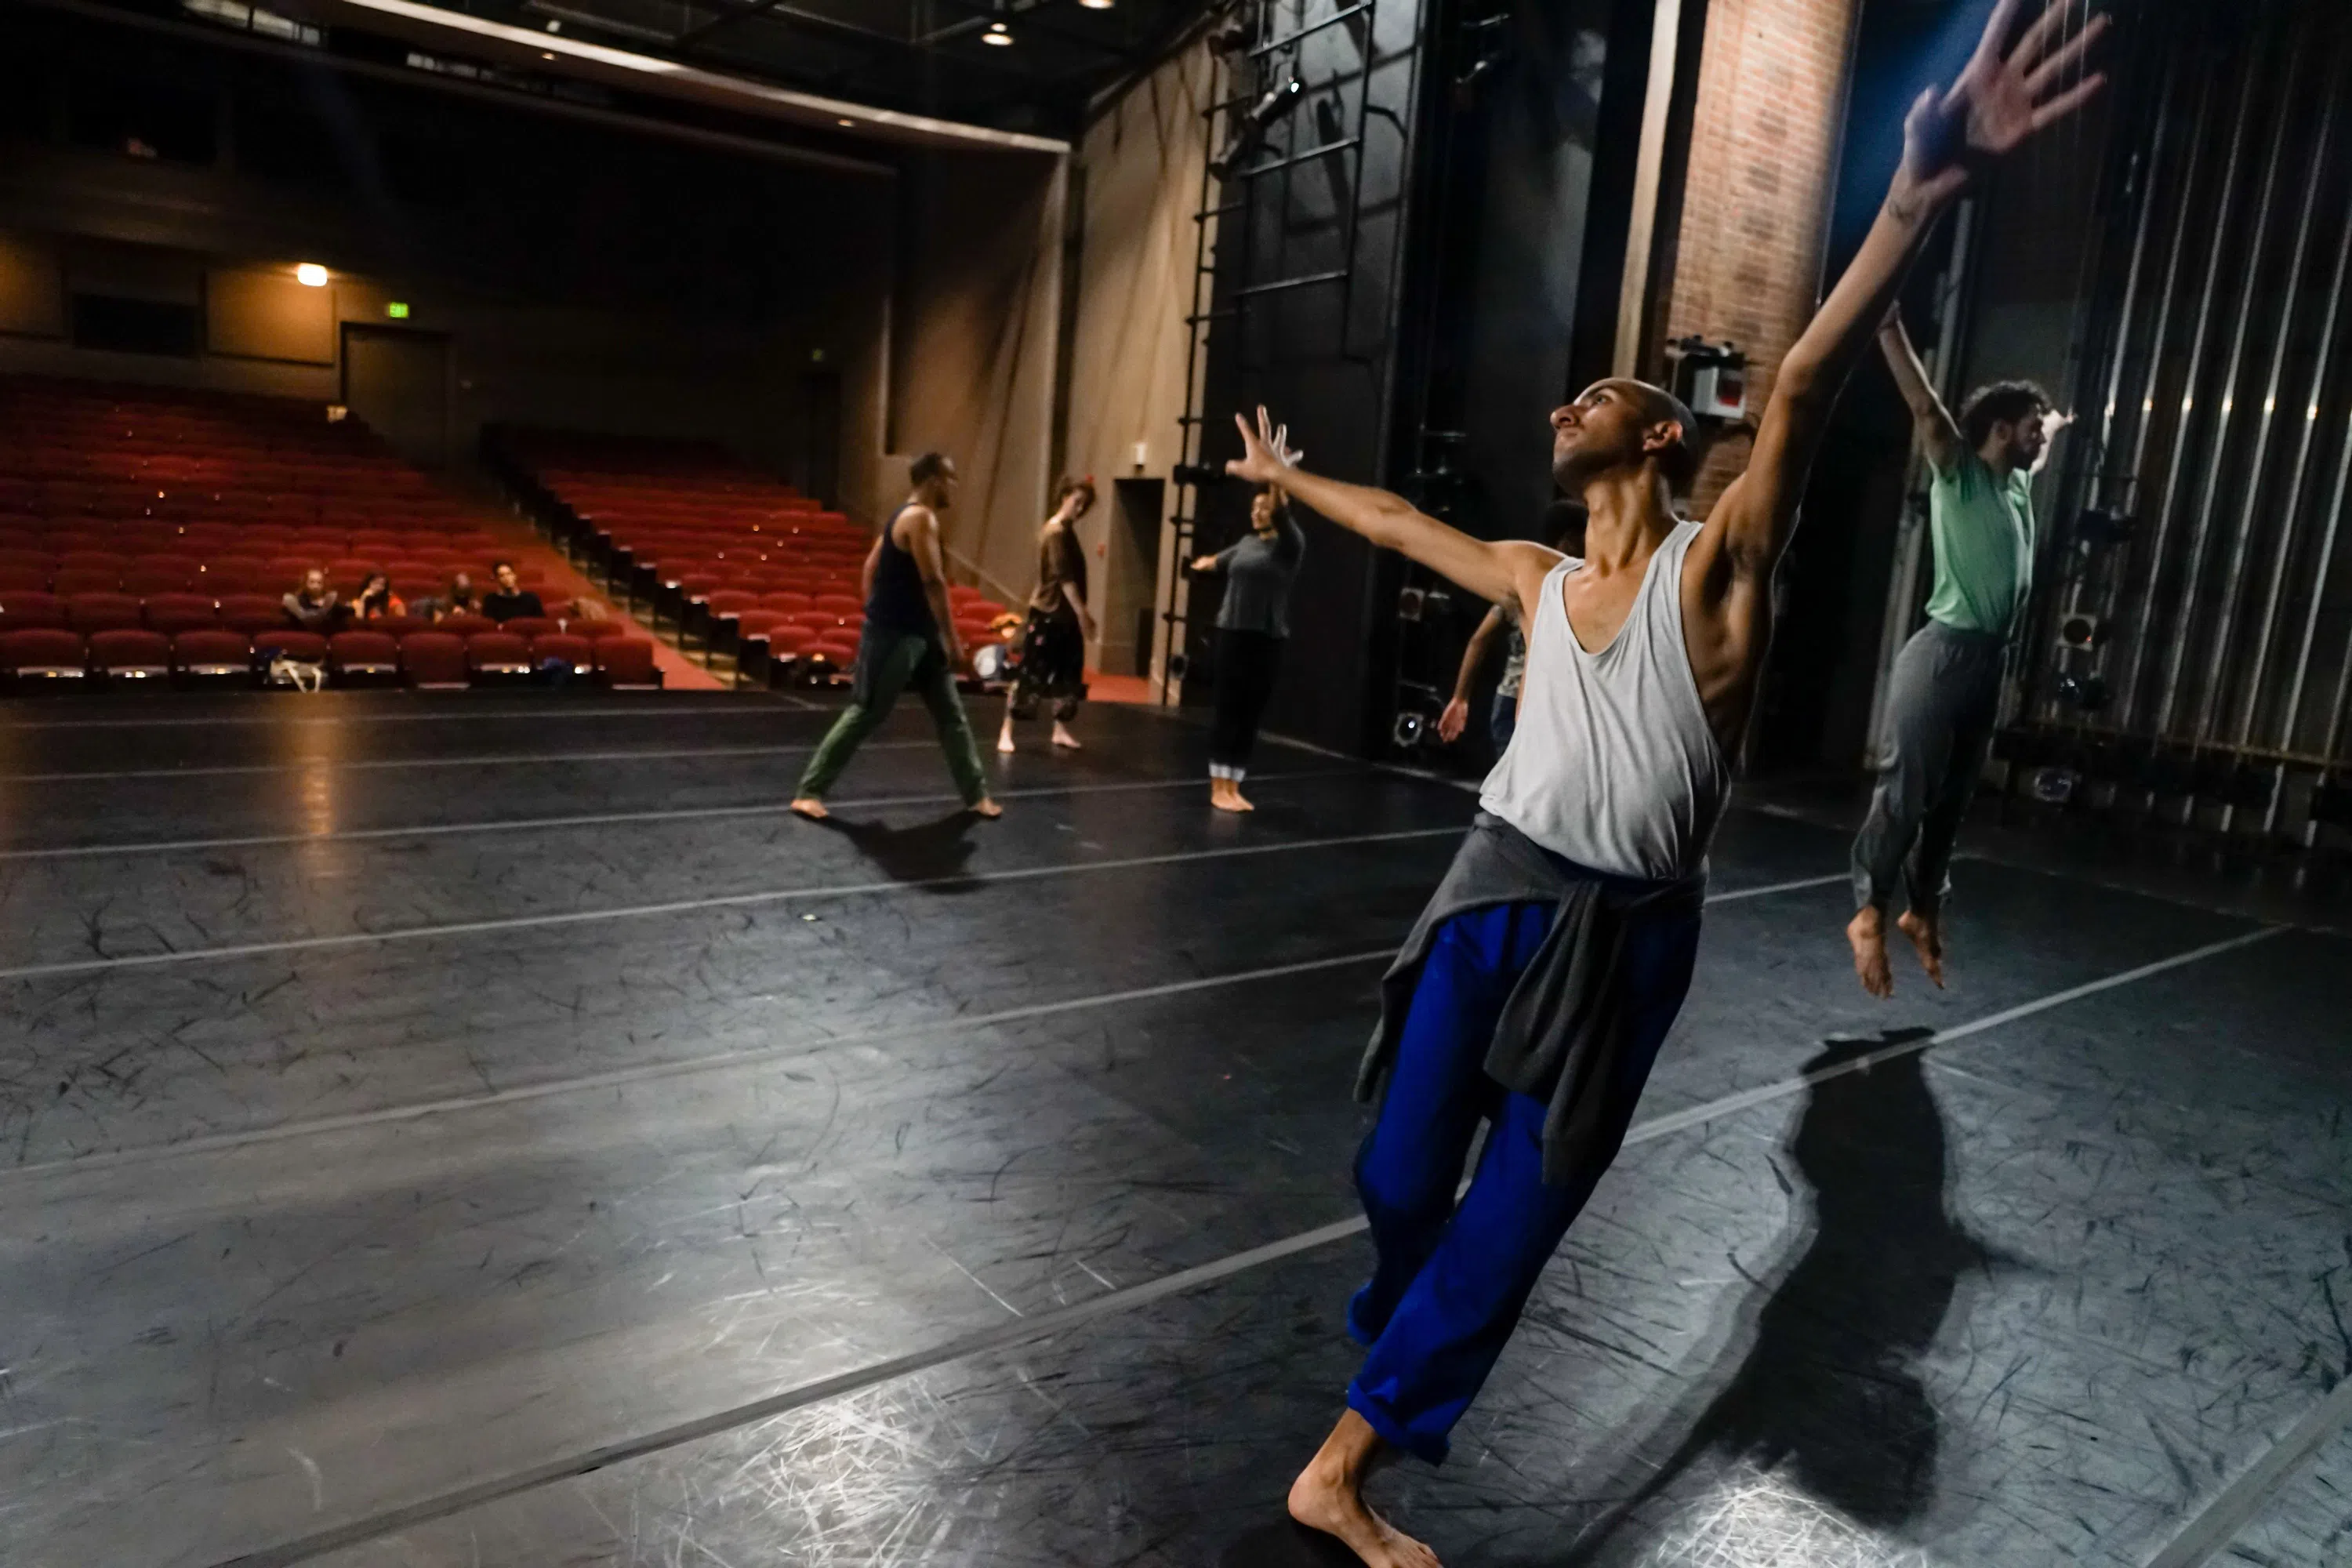 Five dancers practicing on stage with the empty audience seats in the background.